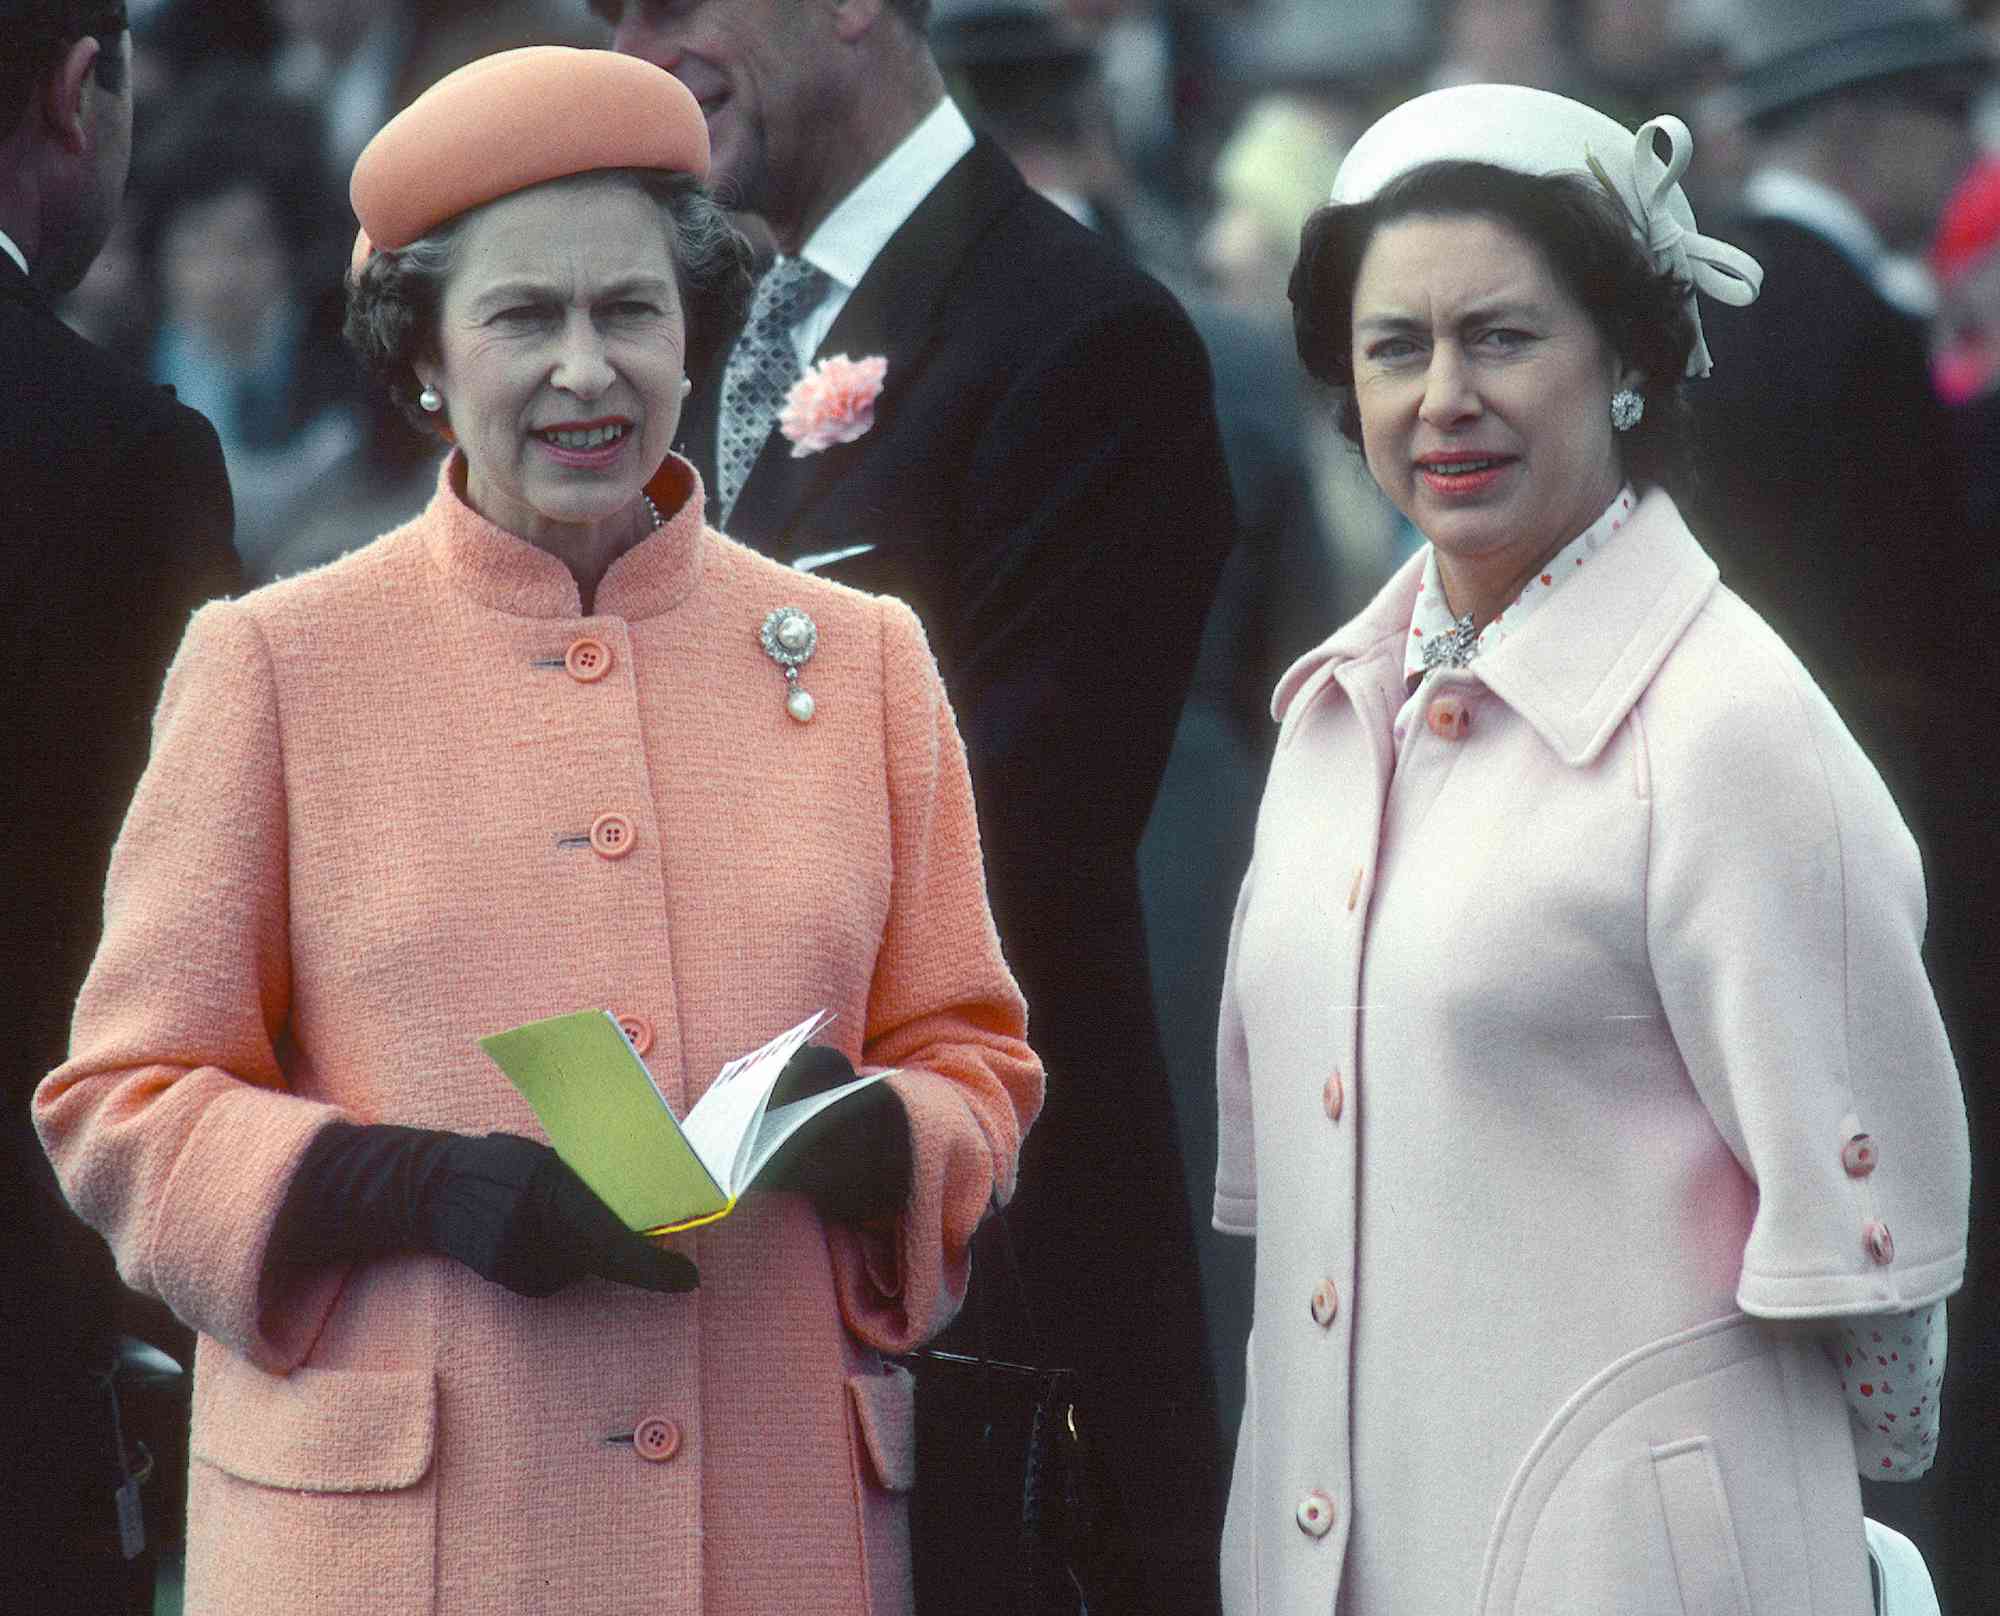 Queen Elizabeth ll and her sister Princess Margaret attend the Epsom Derby on June 06, 1979 in Epsom, England